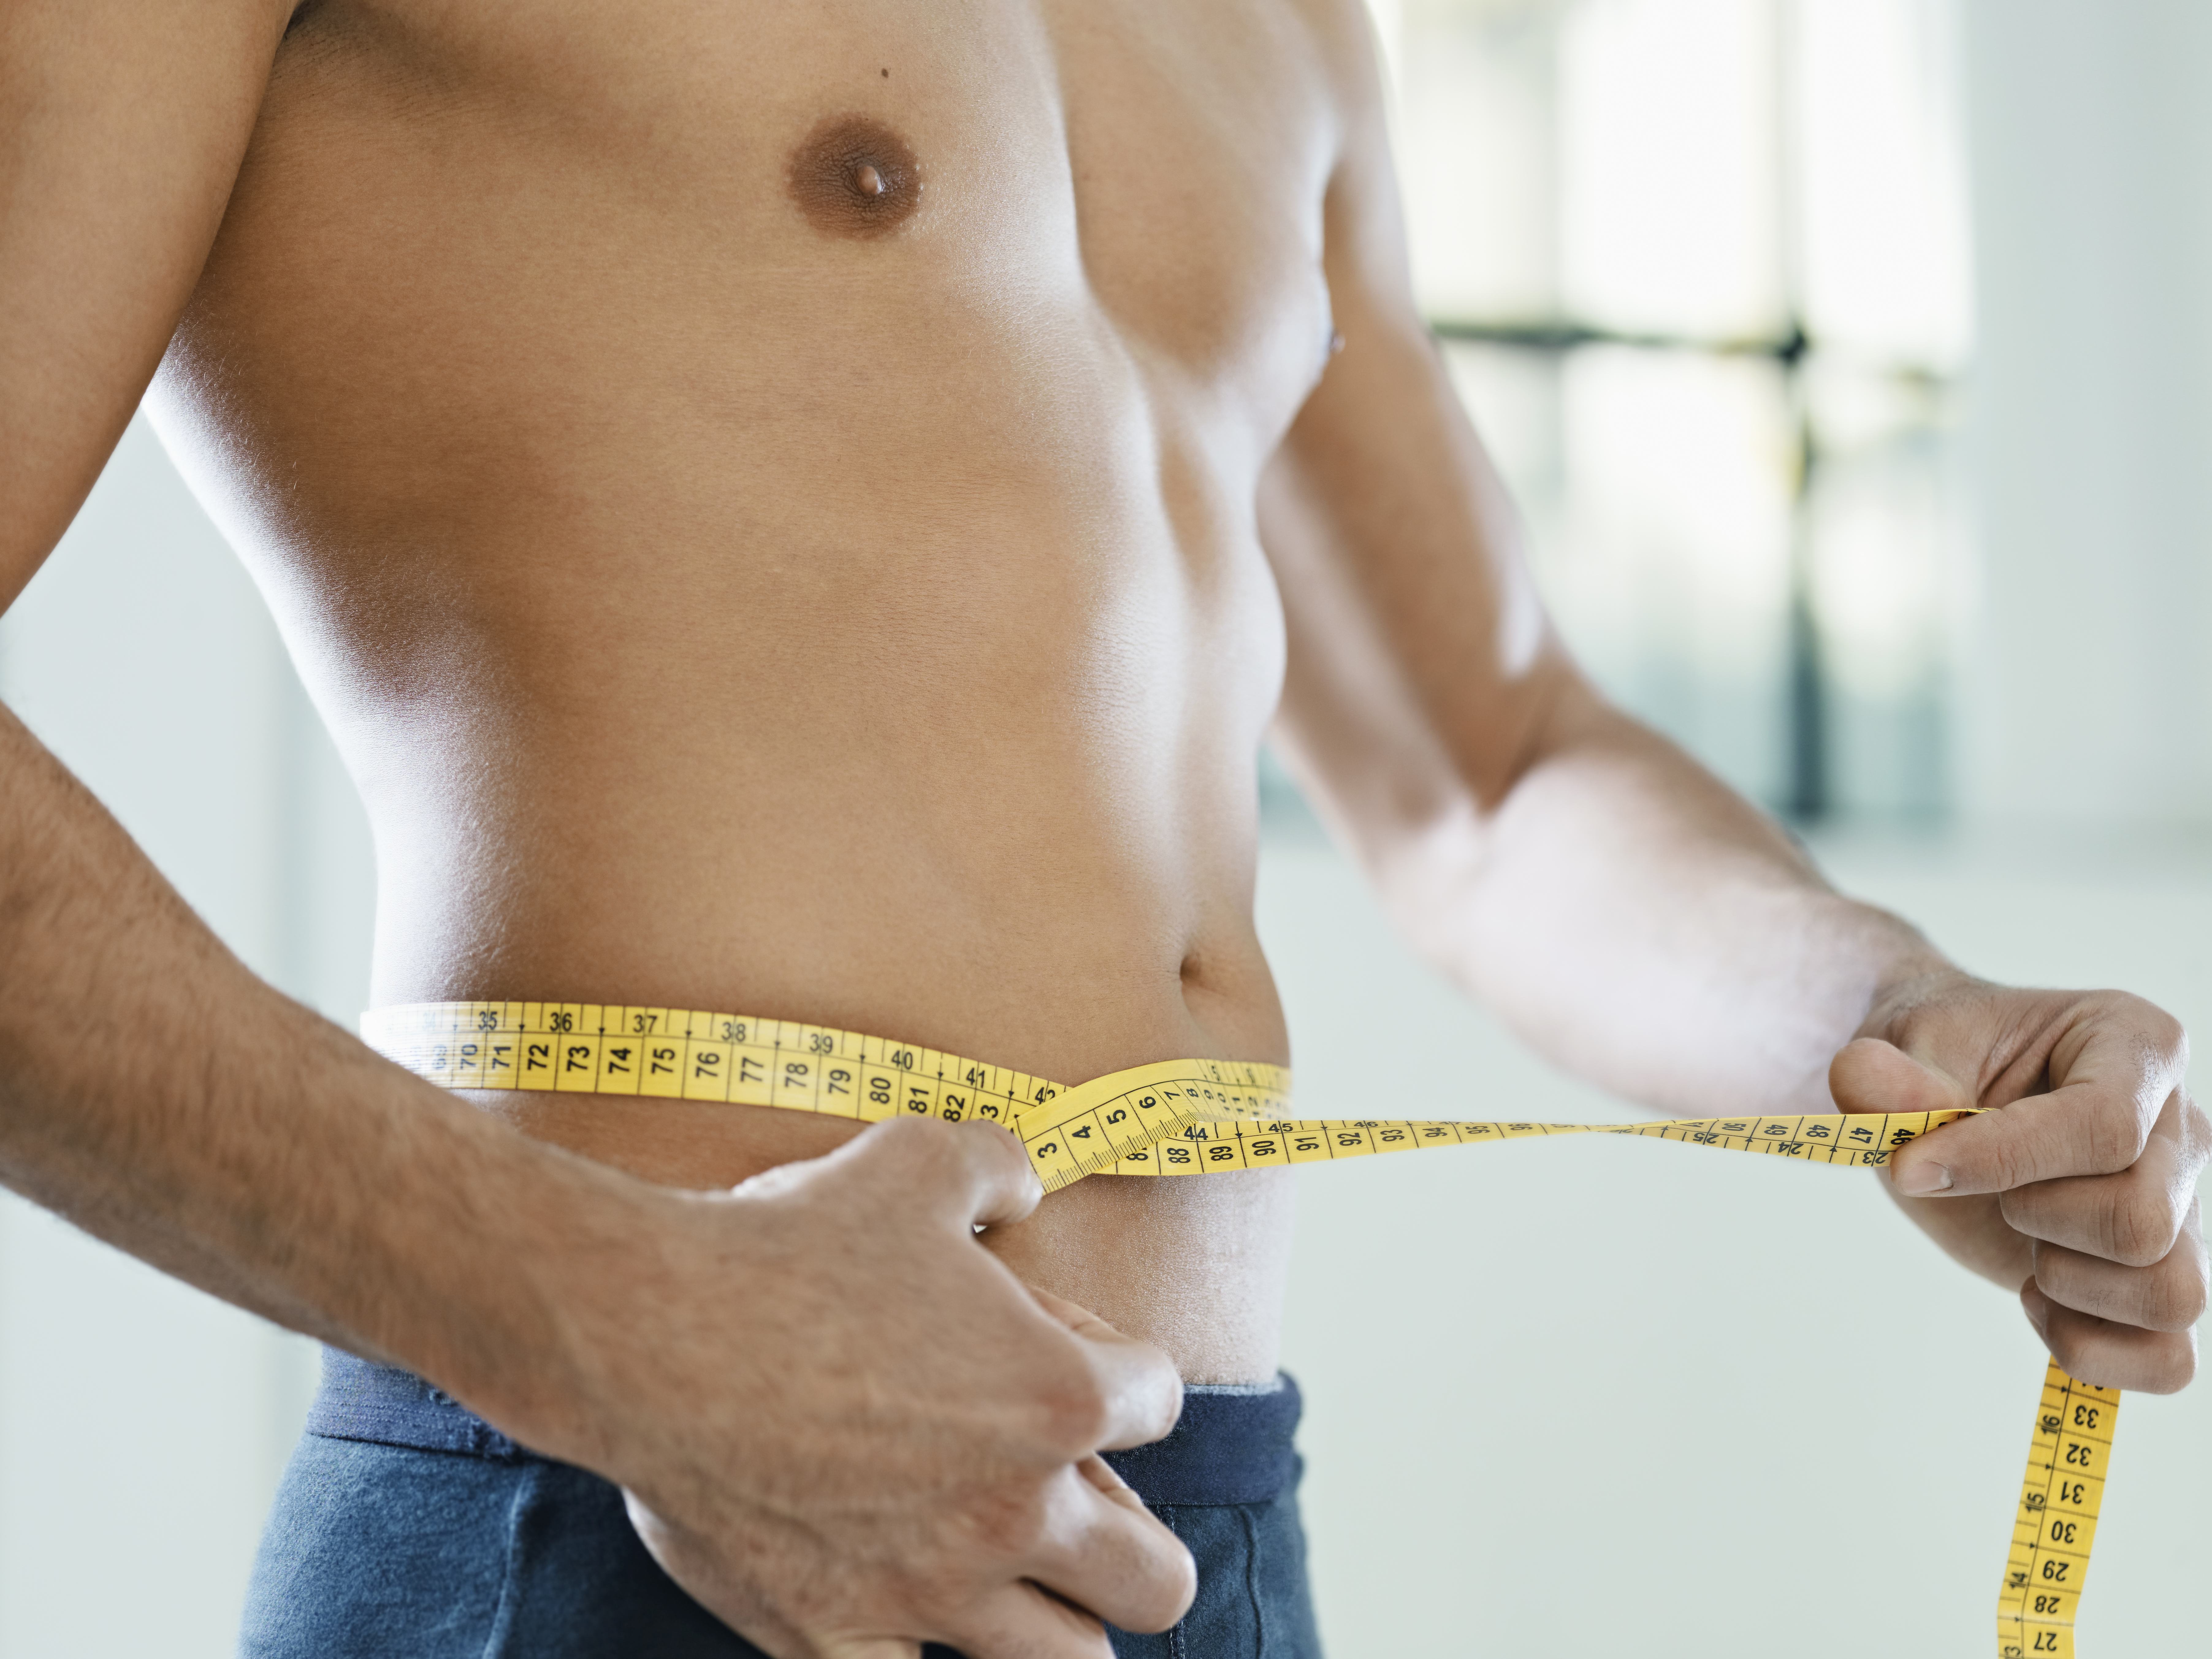 How to Use Body Measurements to Track Your Weight Loss